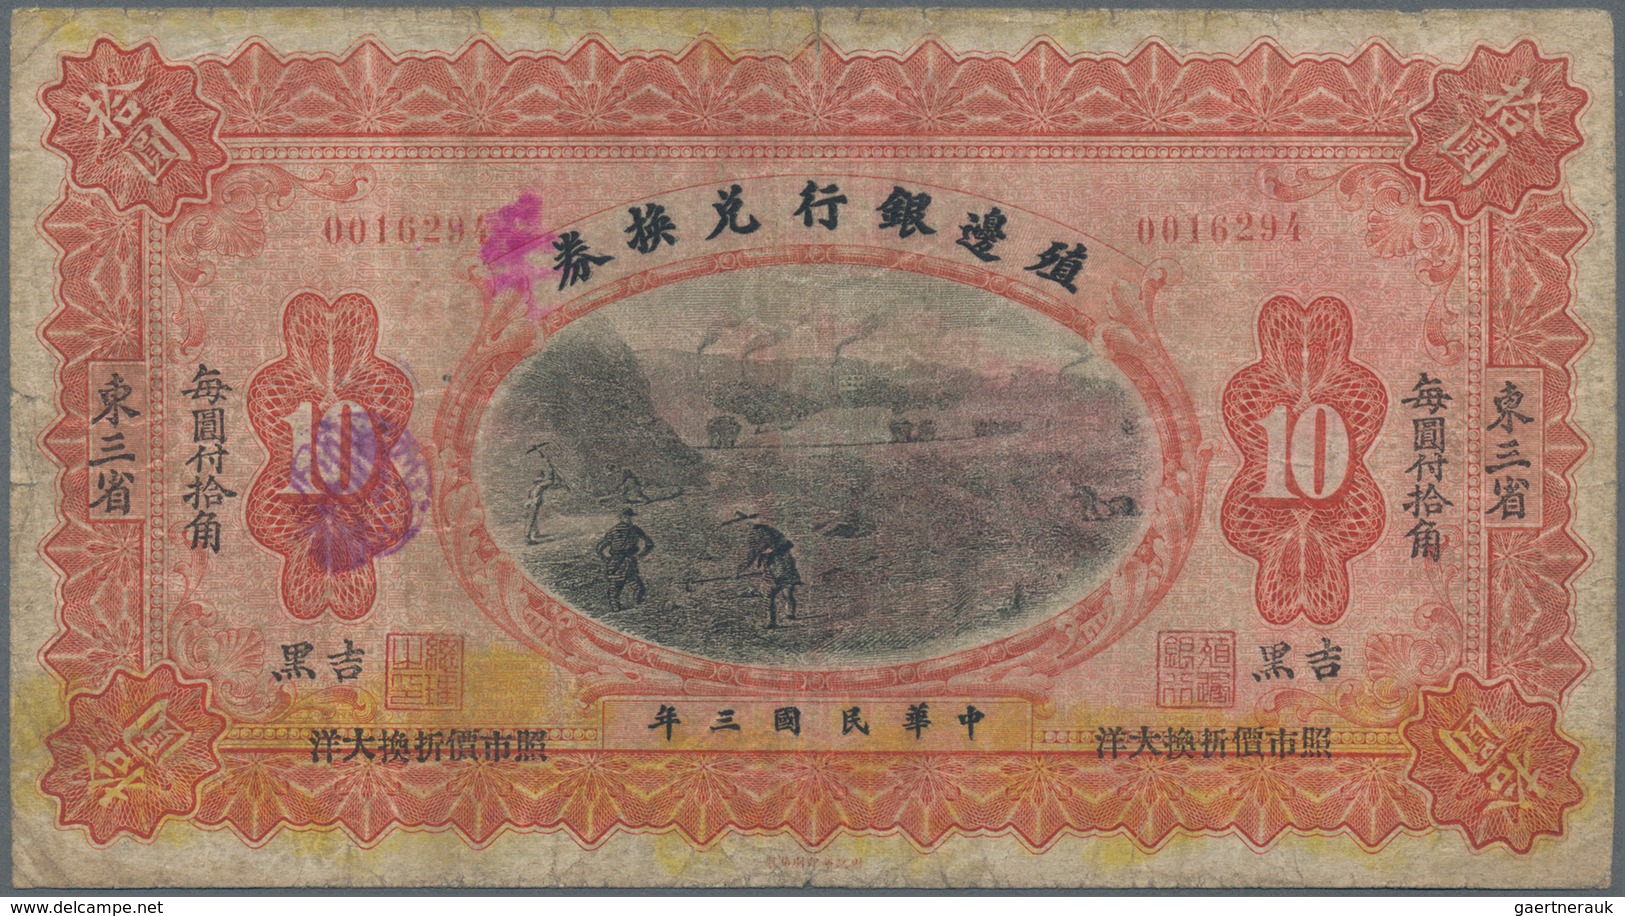 China: Bank Of Territorial Development 10 Dollars 1914, Place Of Issue: MANCHURIA, P.518g, Small Bor - China